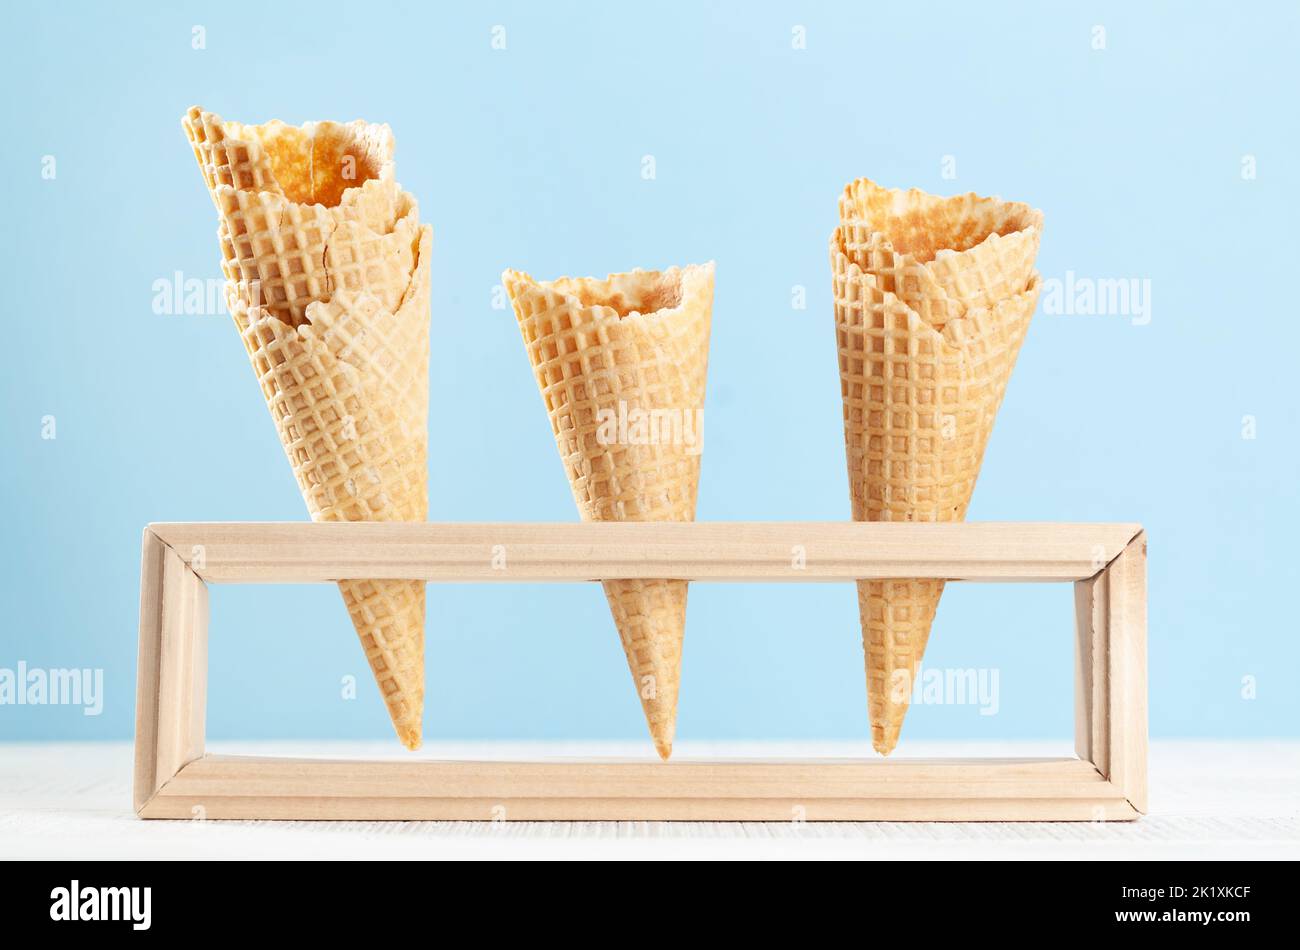 Empty ice cream waffle cones in wooden stand Stock Photo